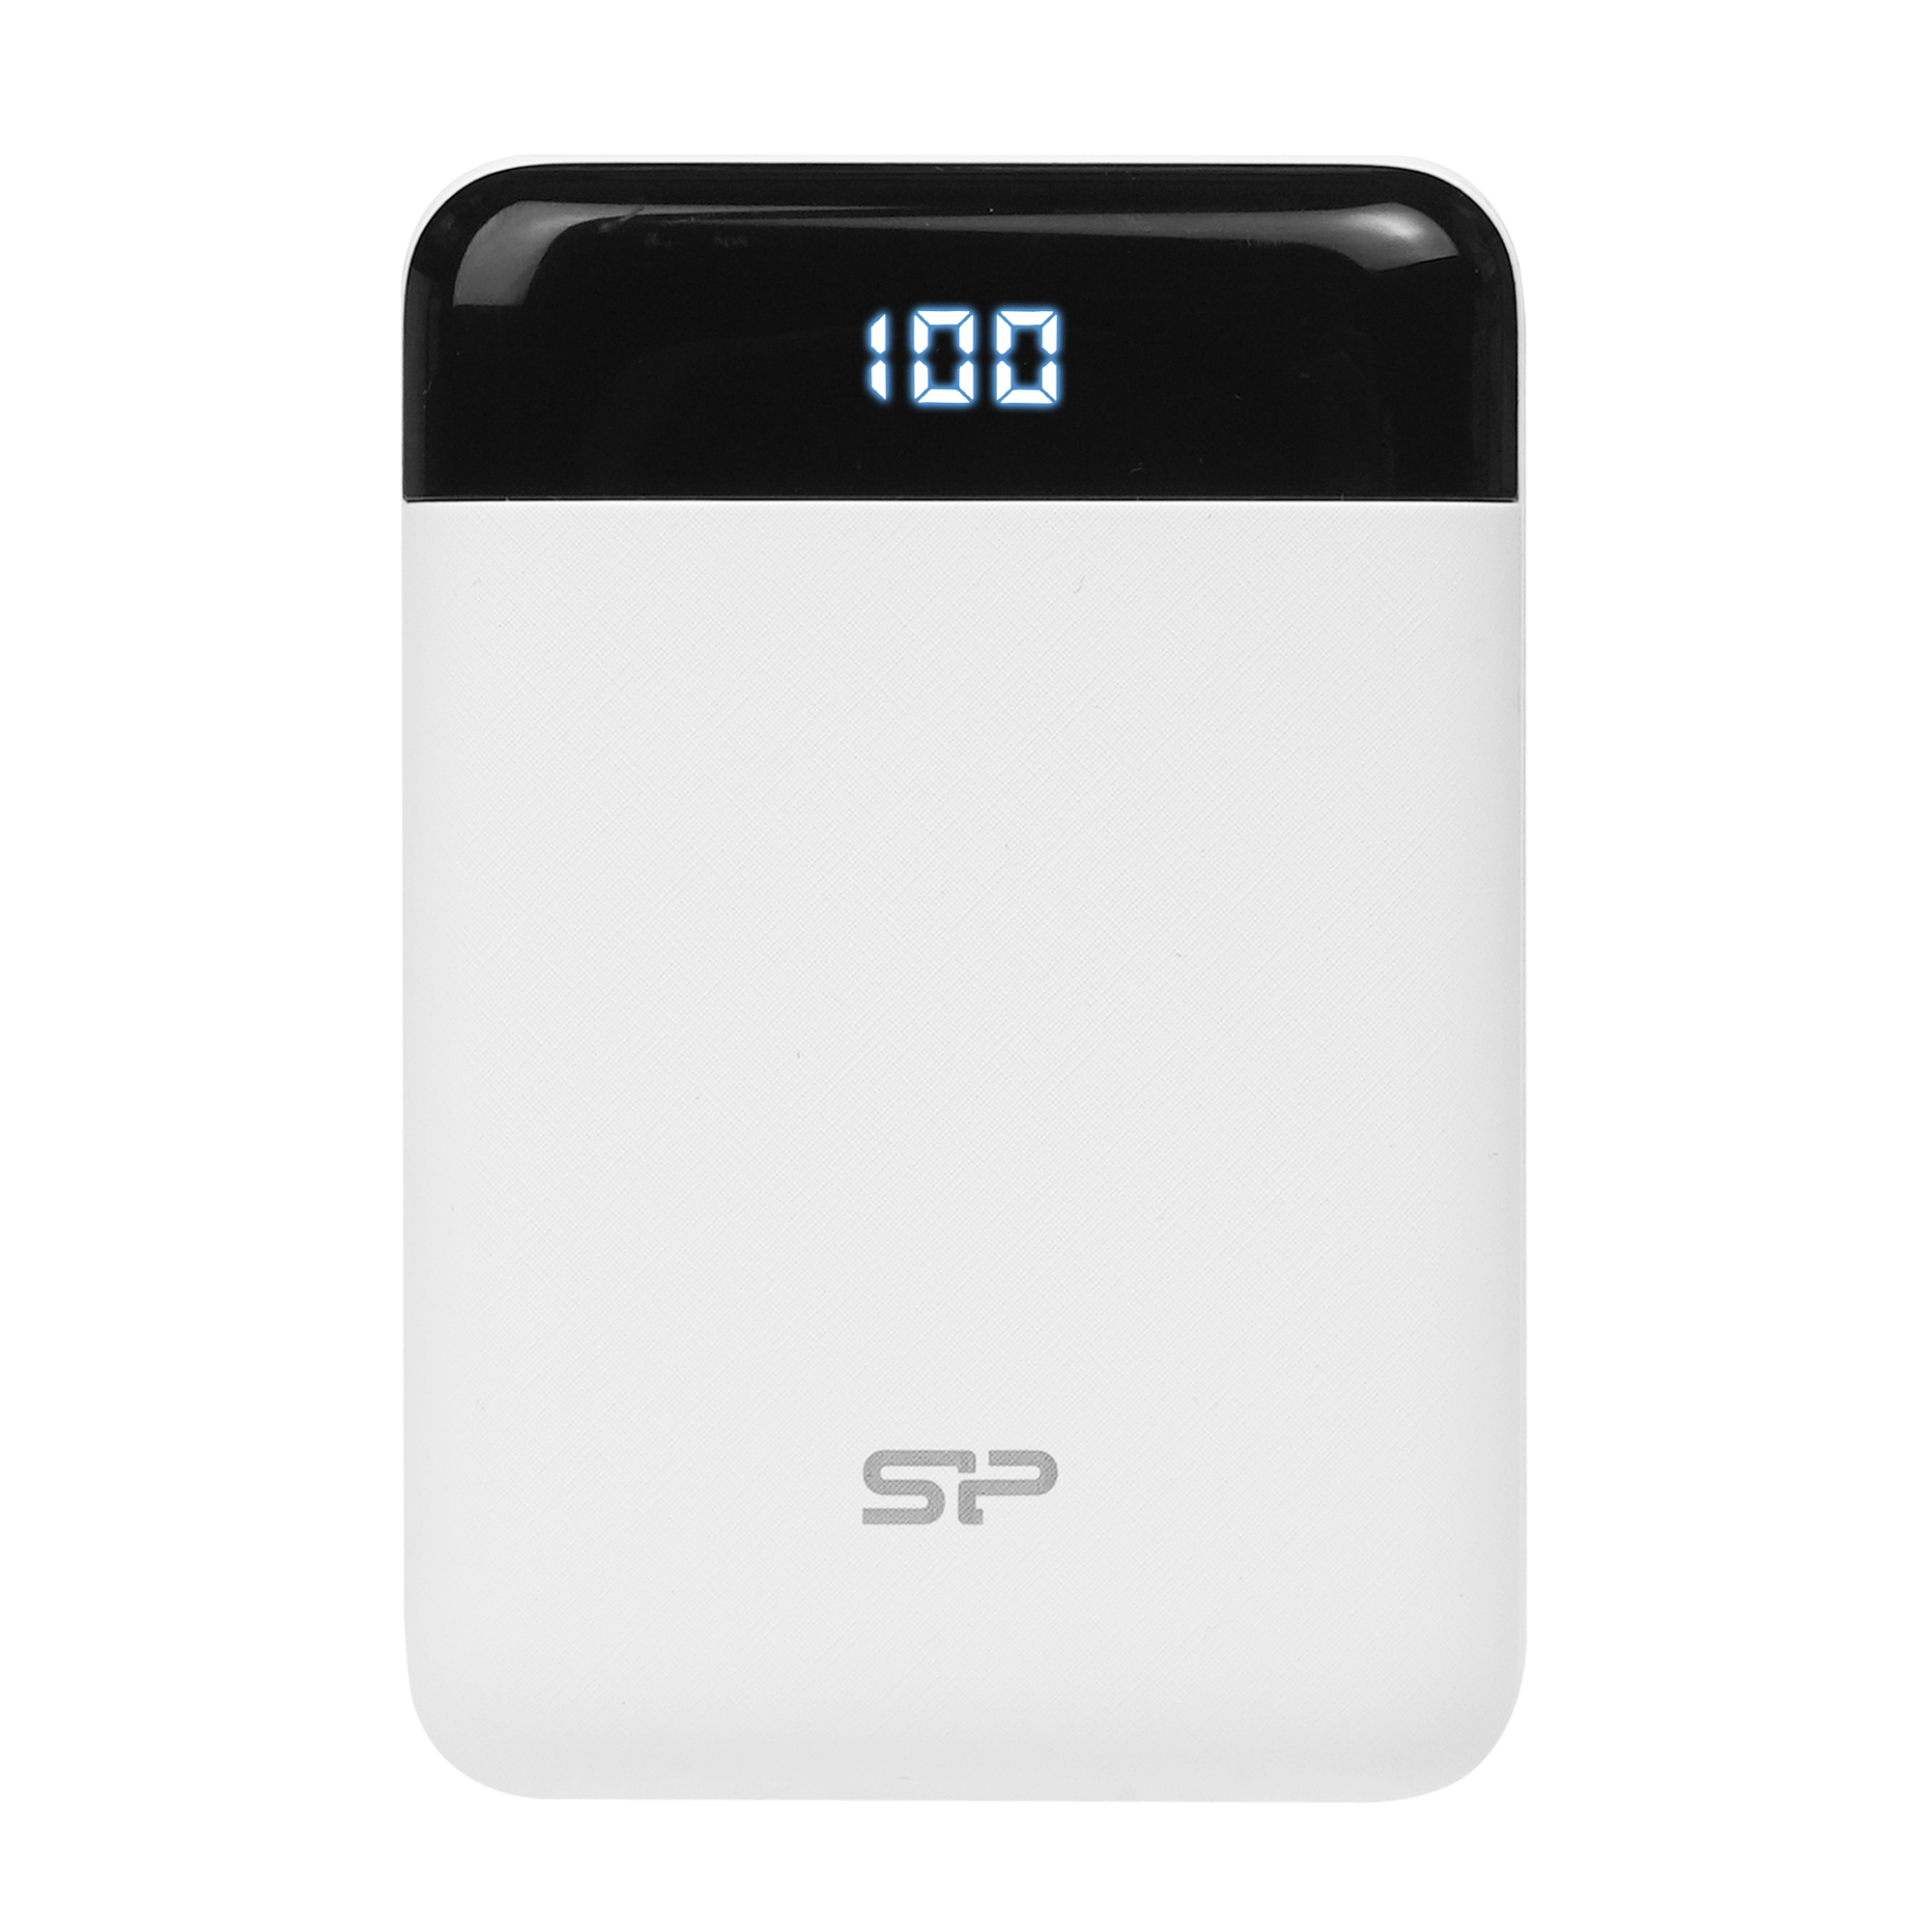 Silicon Power GP25 10,000mAh Power Bank with Dual USB Output and LED Display, White